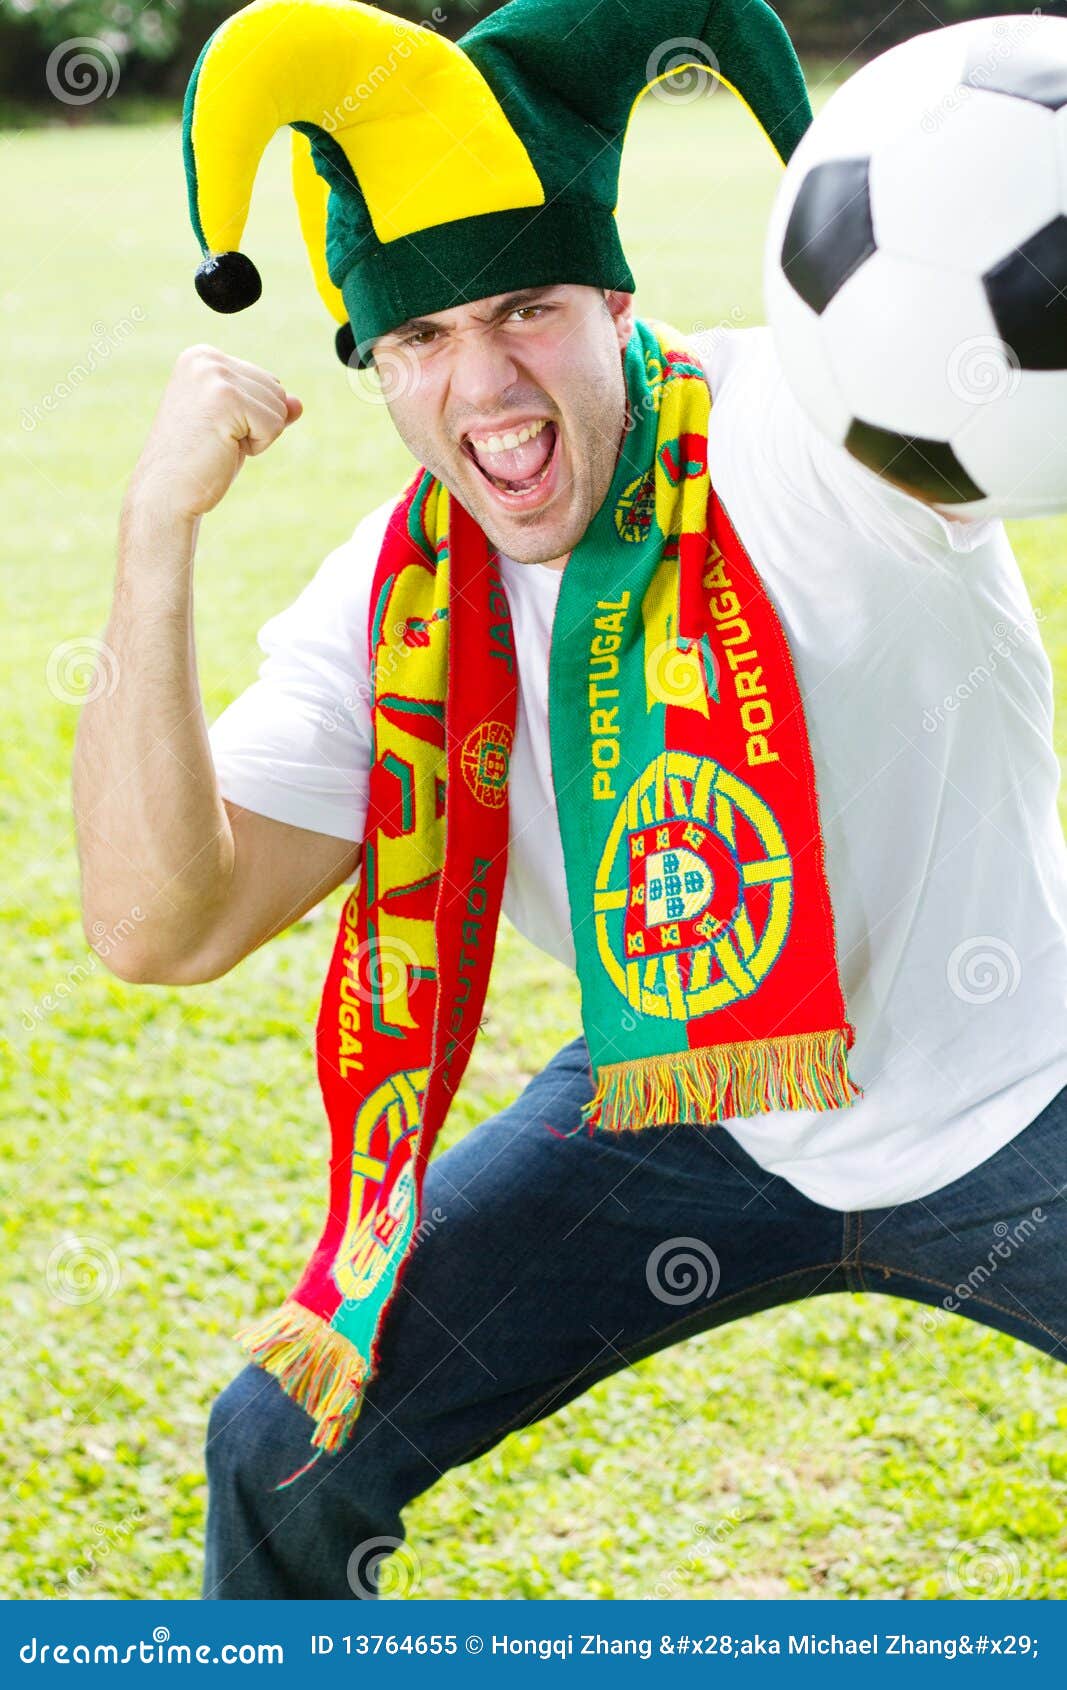 Portugal soccer fan stock image. Image of 2012, excitement - 13764655